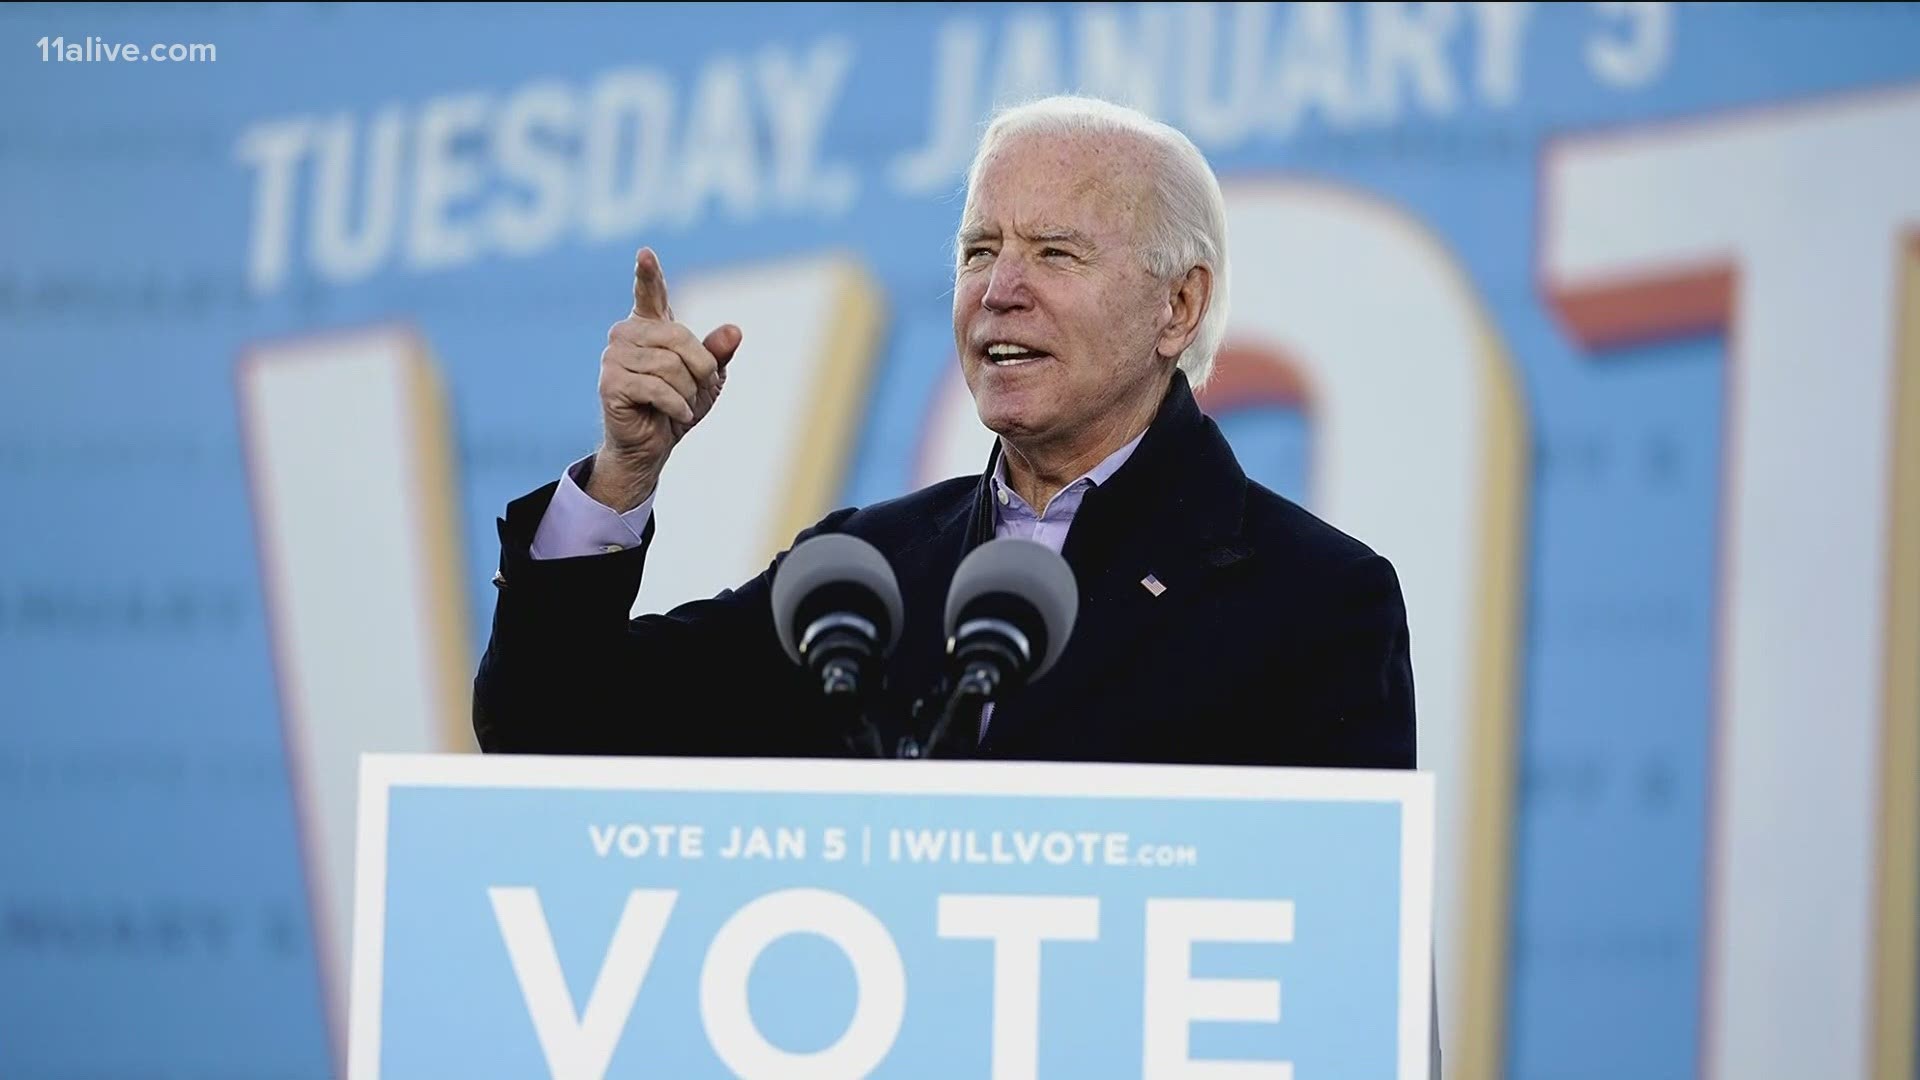 As the first Democrat to win the presidency in Georgia in 30 years, Biden said flipping the Senate to an even 50-50 could bring immediate relief.